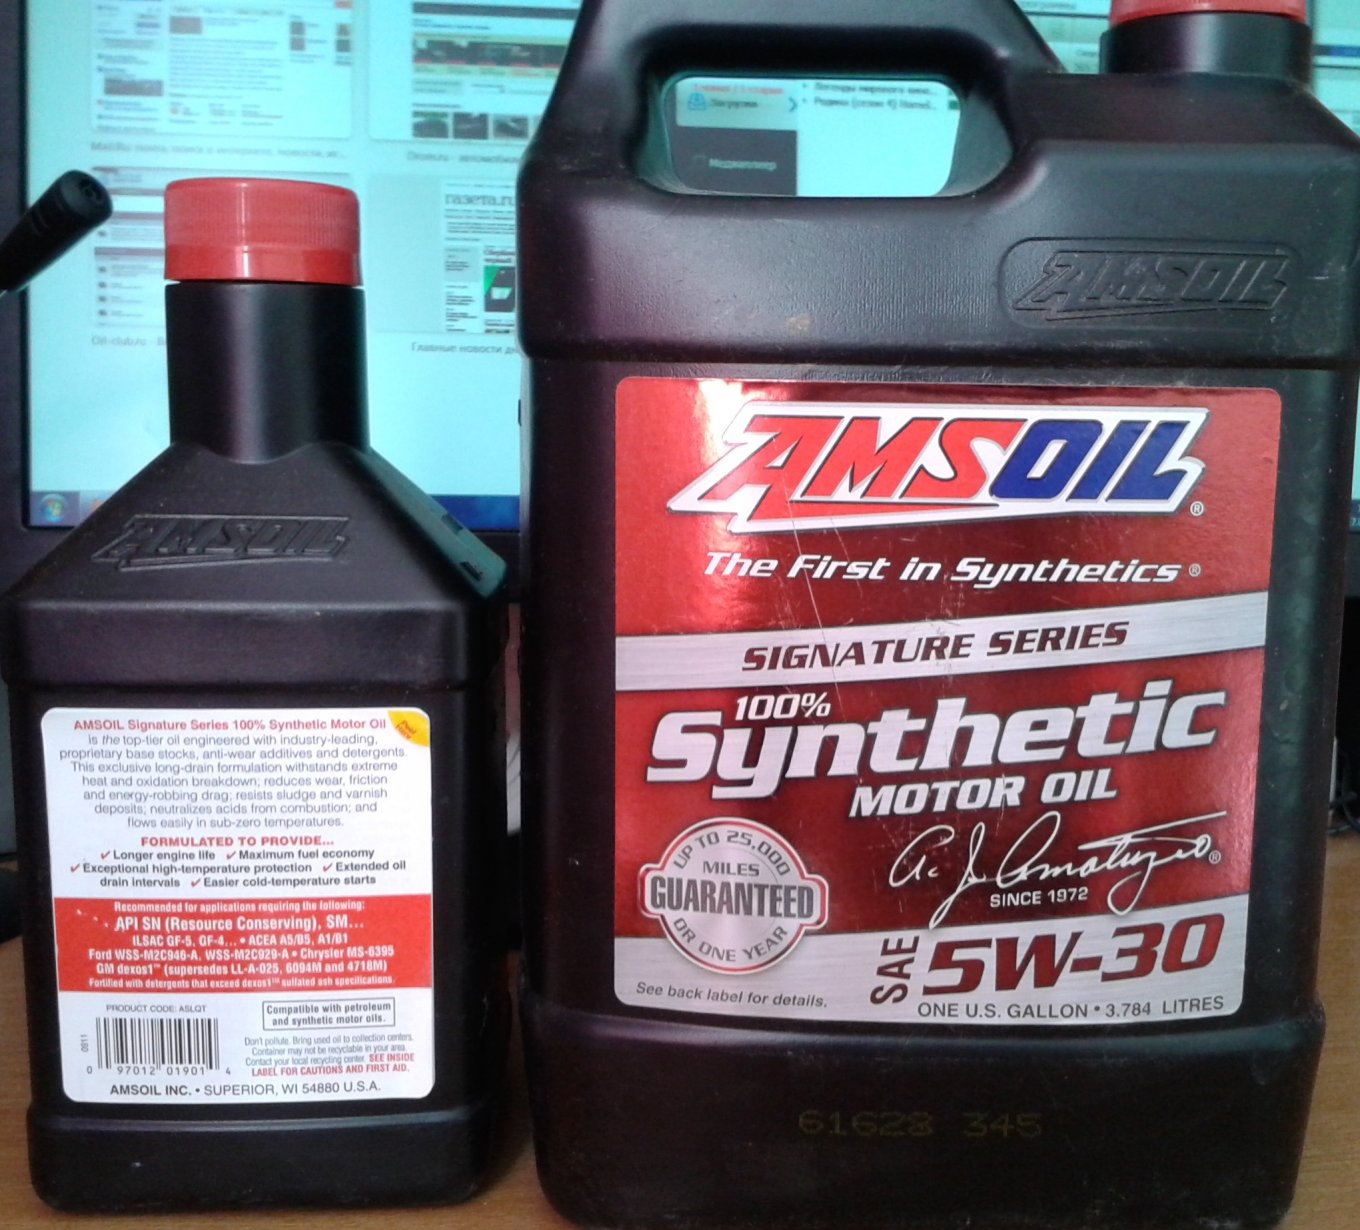 Amsoil signature series synthetic. Масло AMSOIL 5w30. AMSOIL Signature Series 5w-30. AMSOIL Signature Series Synthetic Motor Oil SAE 5w-30. Аmsoil Signature Series 100% Synthetic 5w-30.